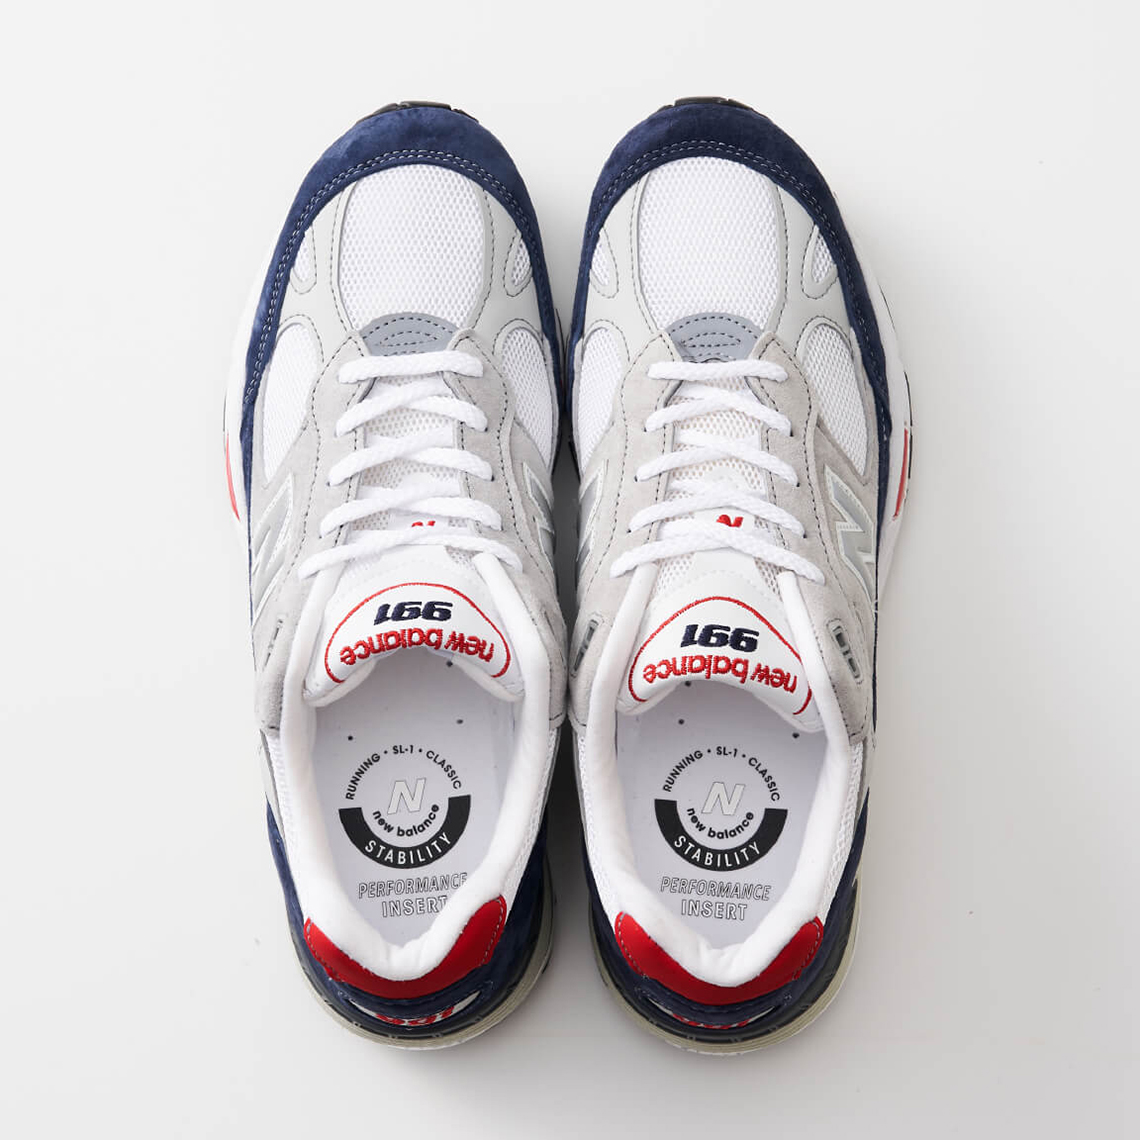 Oshman New Balance Athletic Pack Release Info 4